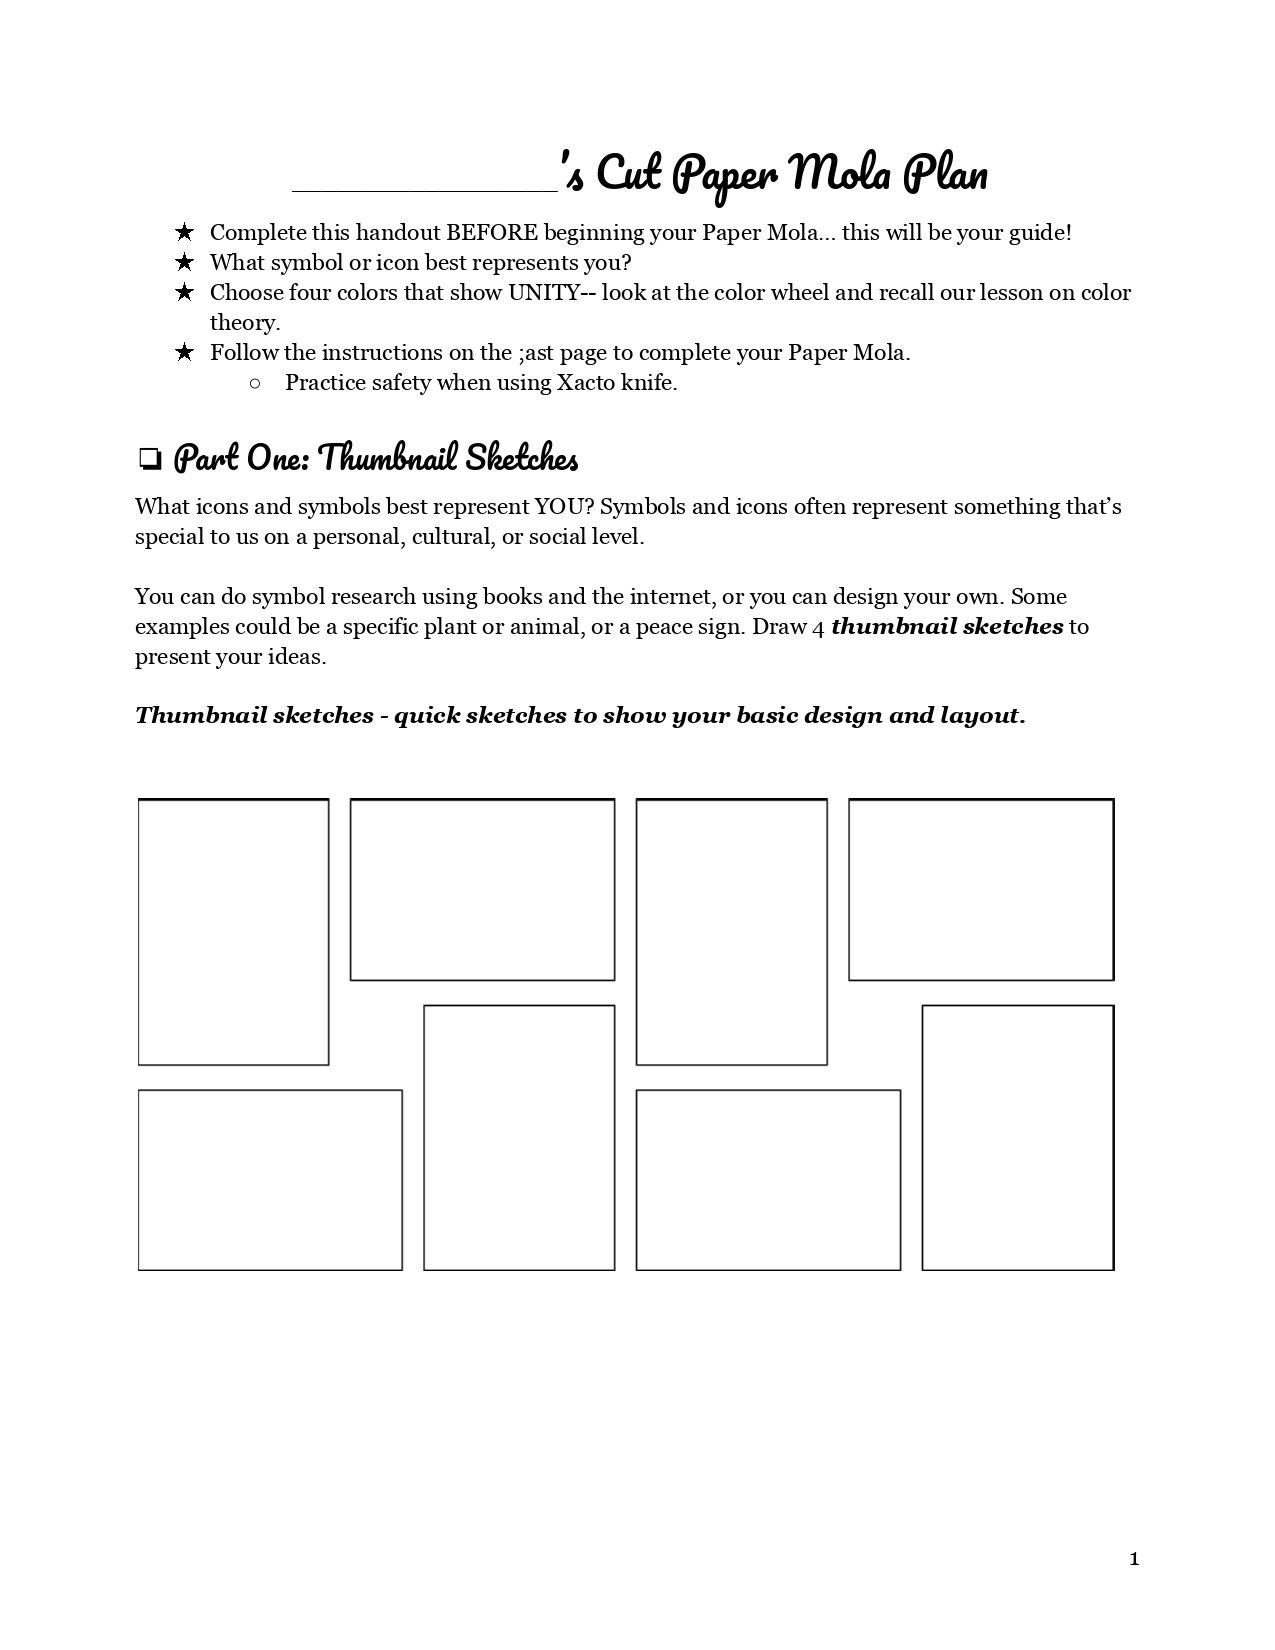 Paper Mola Handout Abby Klein_page-0001.jpg